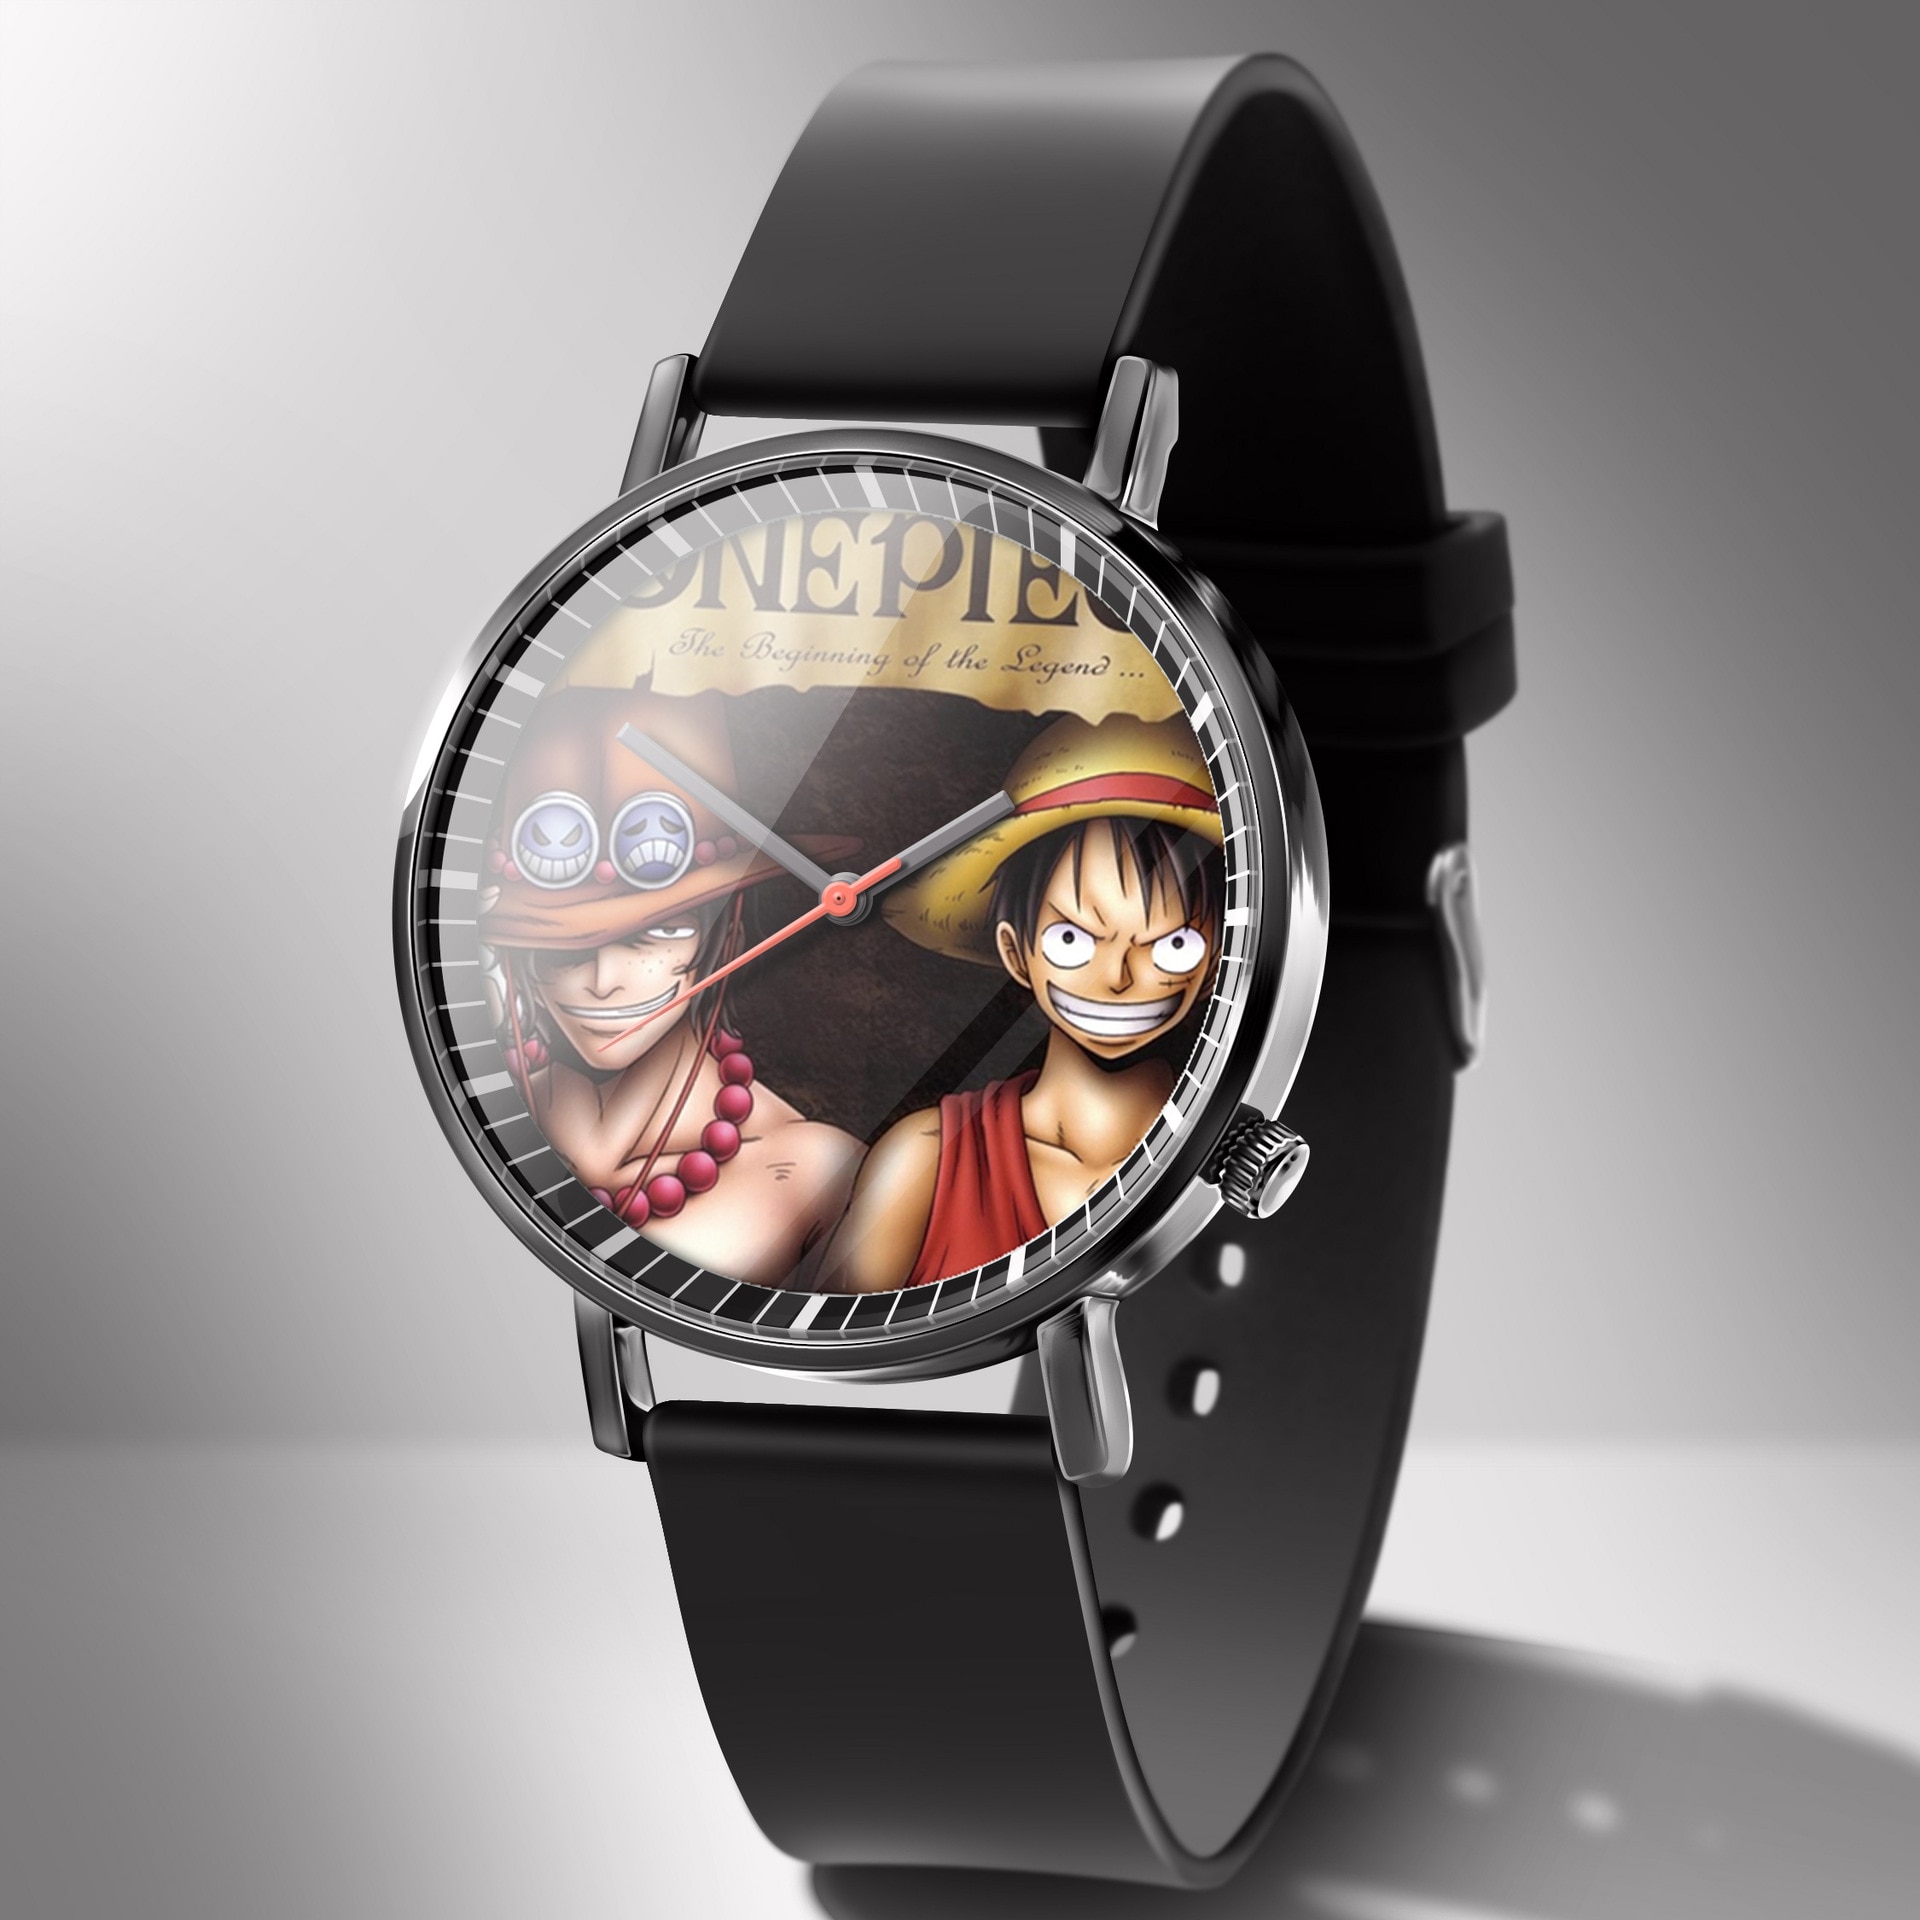 One Piece – Different Characters Cool Wrist Watches (20 Designs) Watches